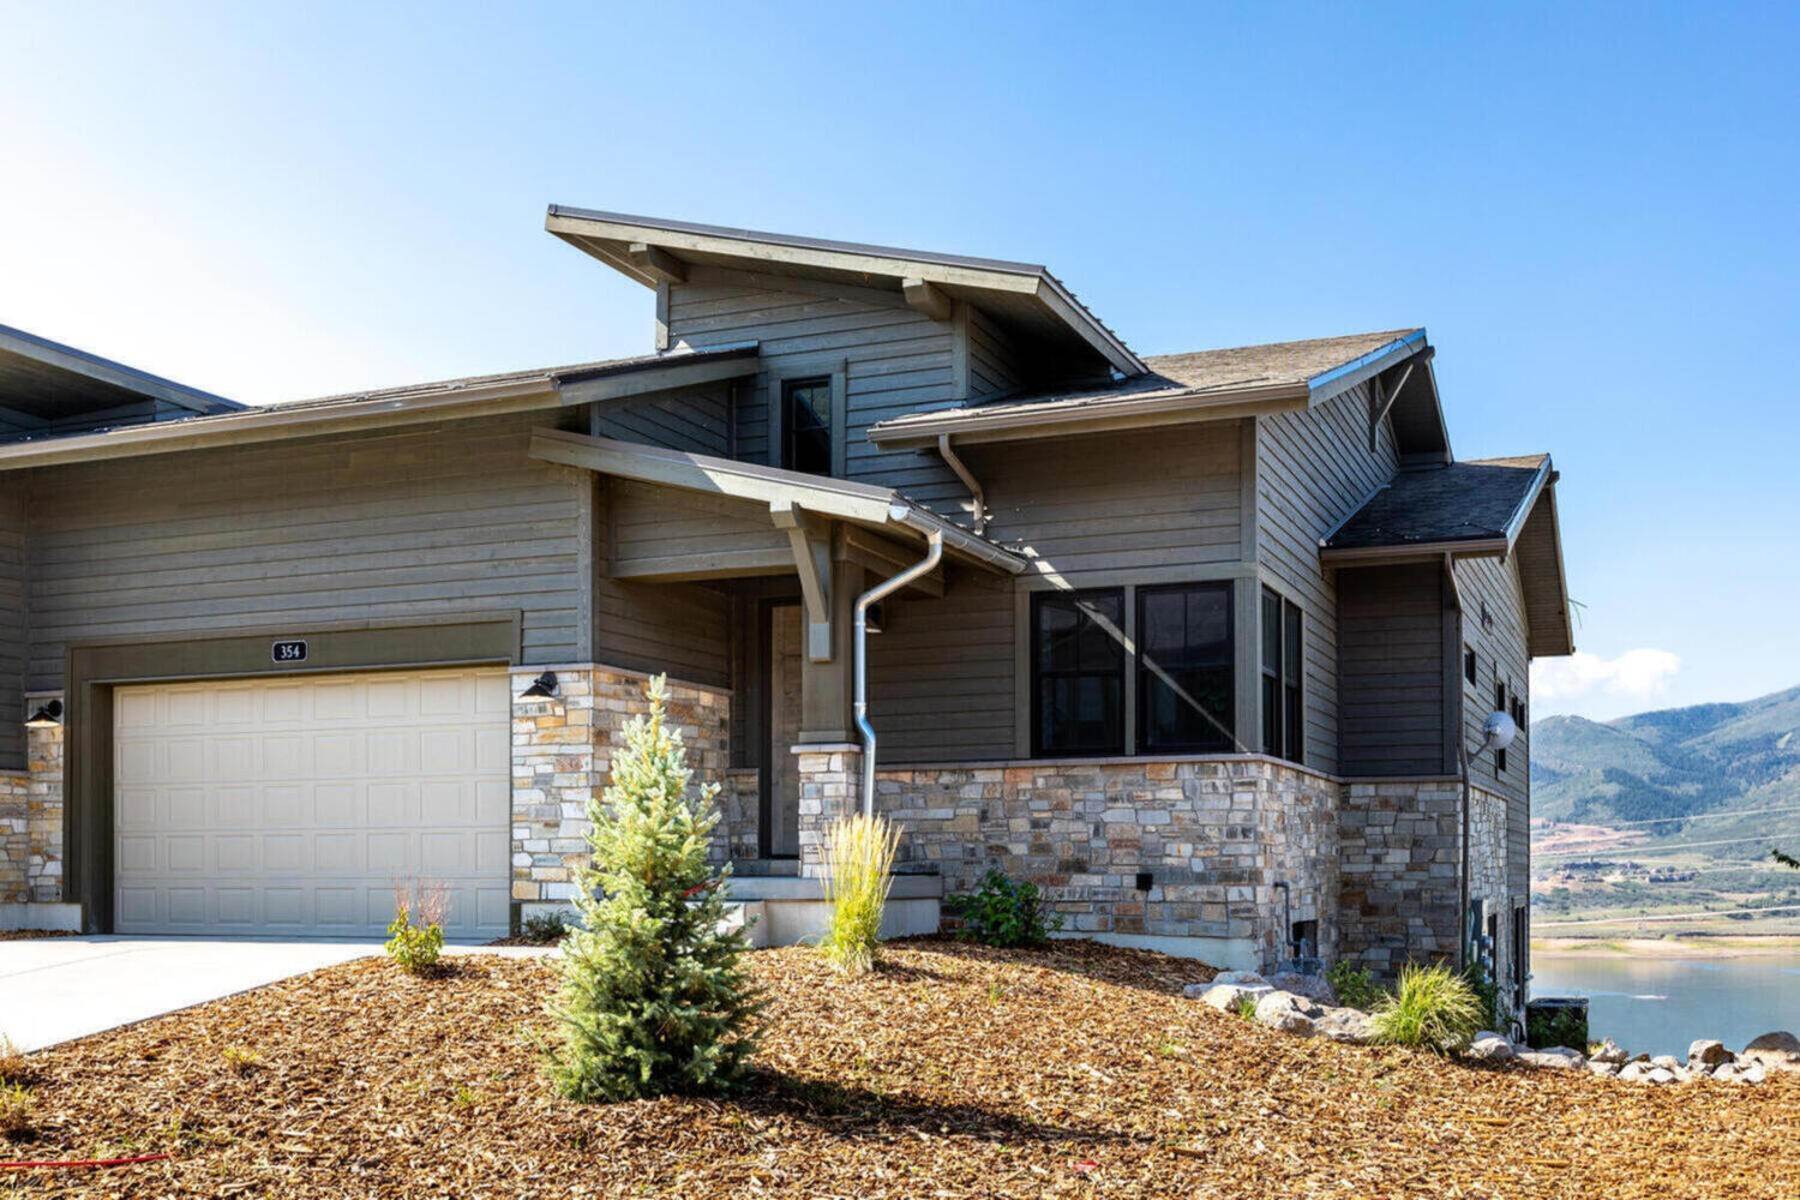 Townhouse for Sale at Lakefront Community With Views Of Deer Valley Resort And Jordanelle Reservoir 618 E Silver Hill Loop, Lot 101 Hideout Canyon, Utah 84036 United States